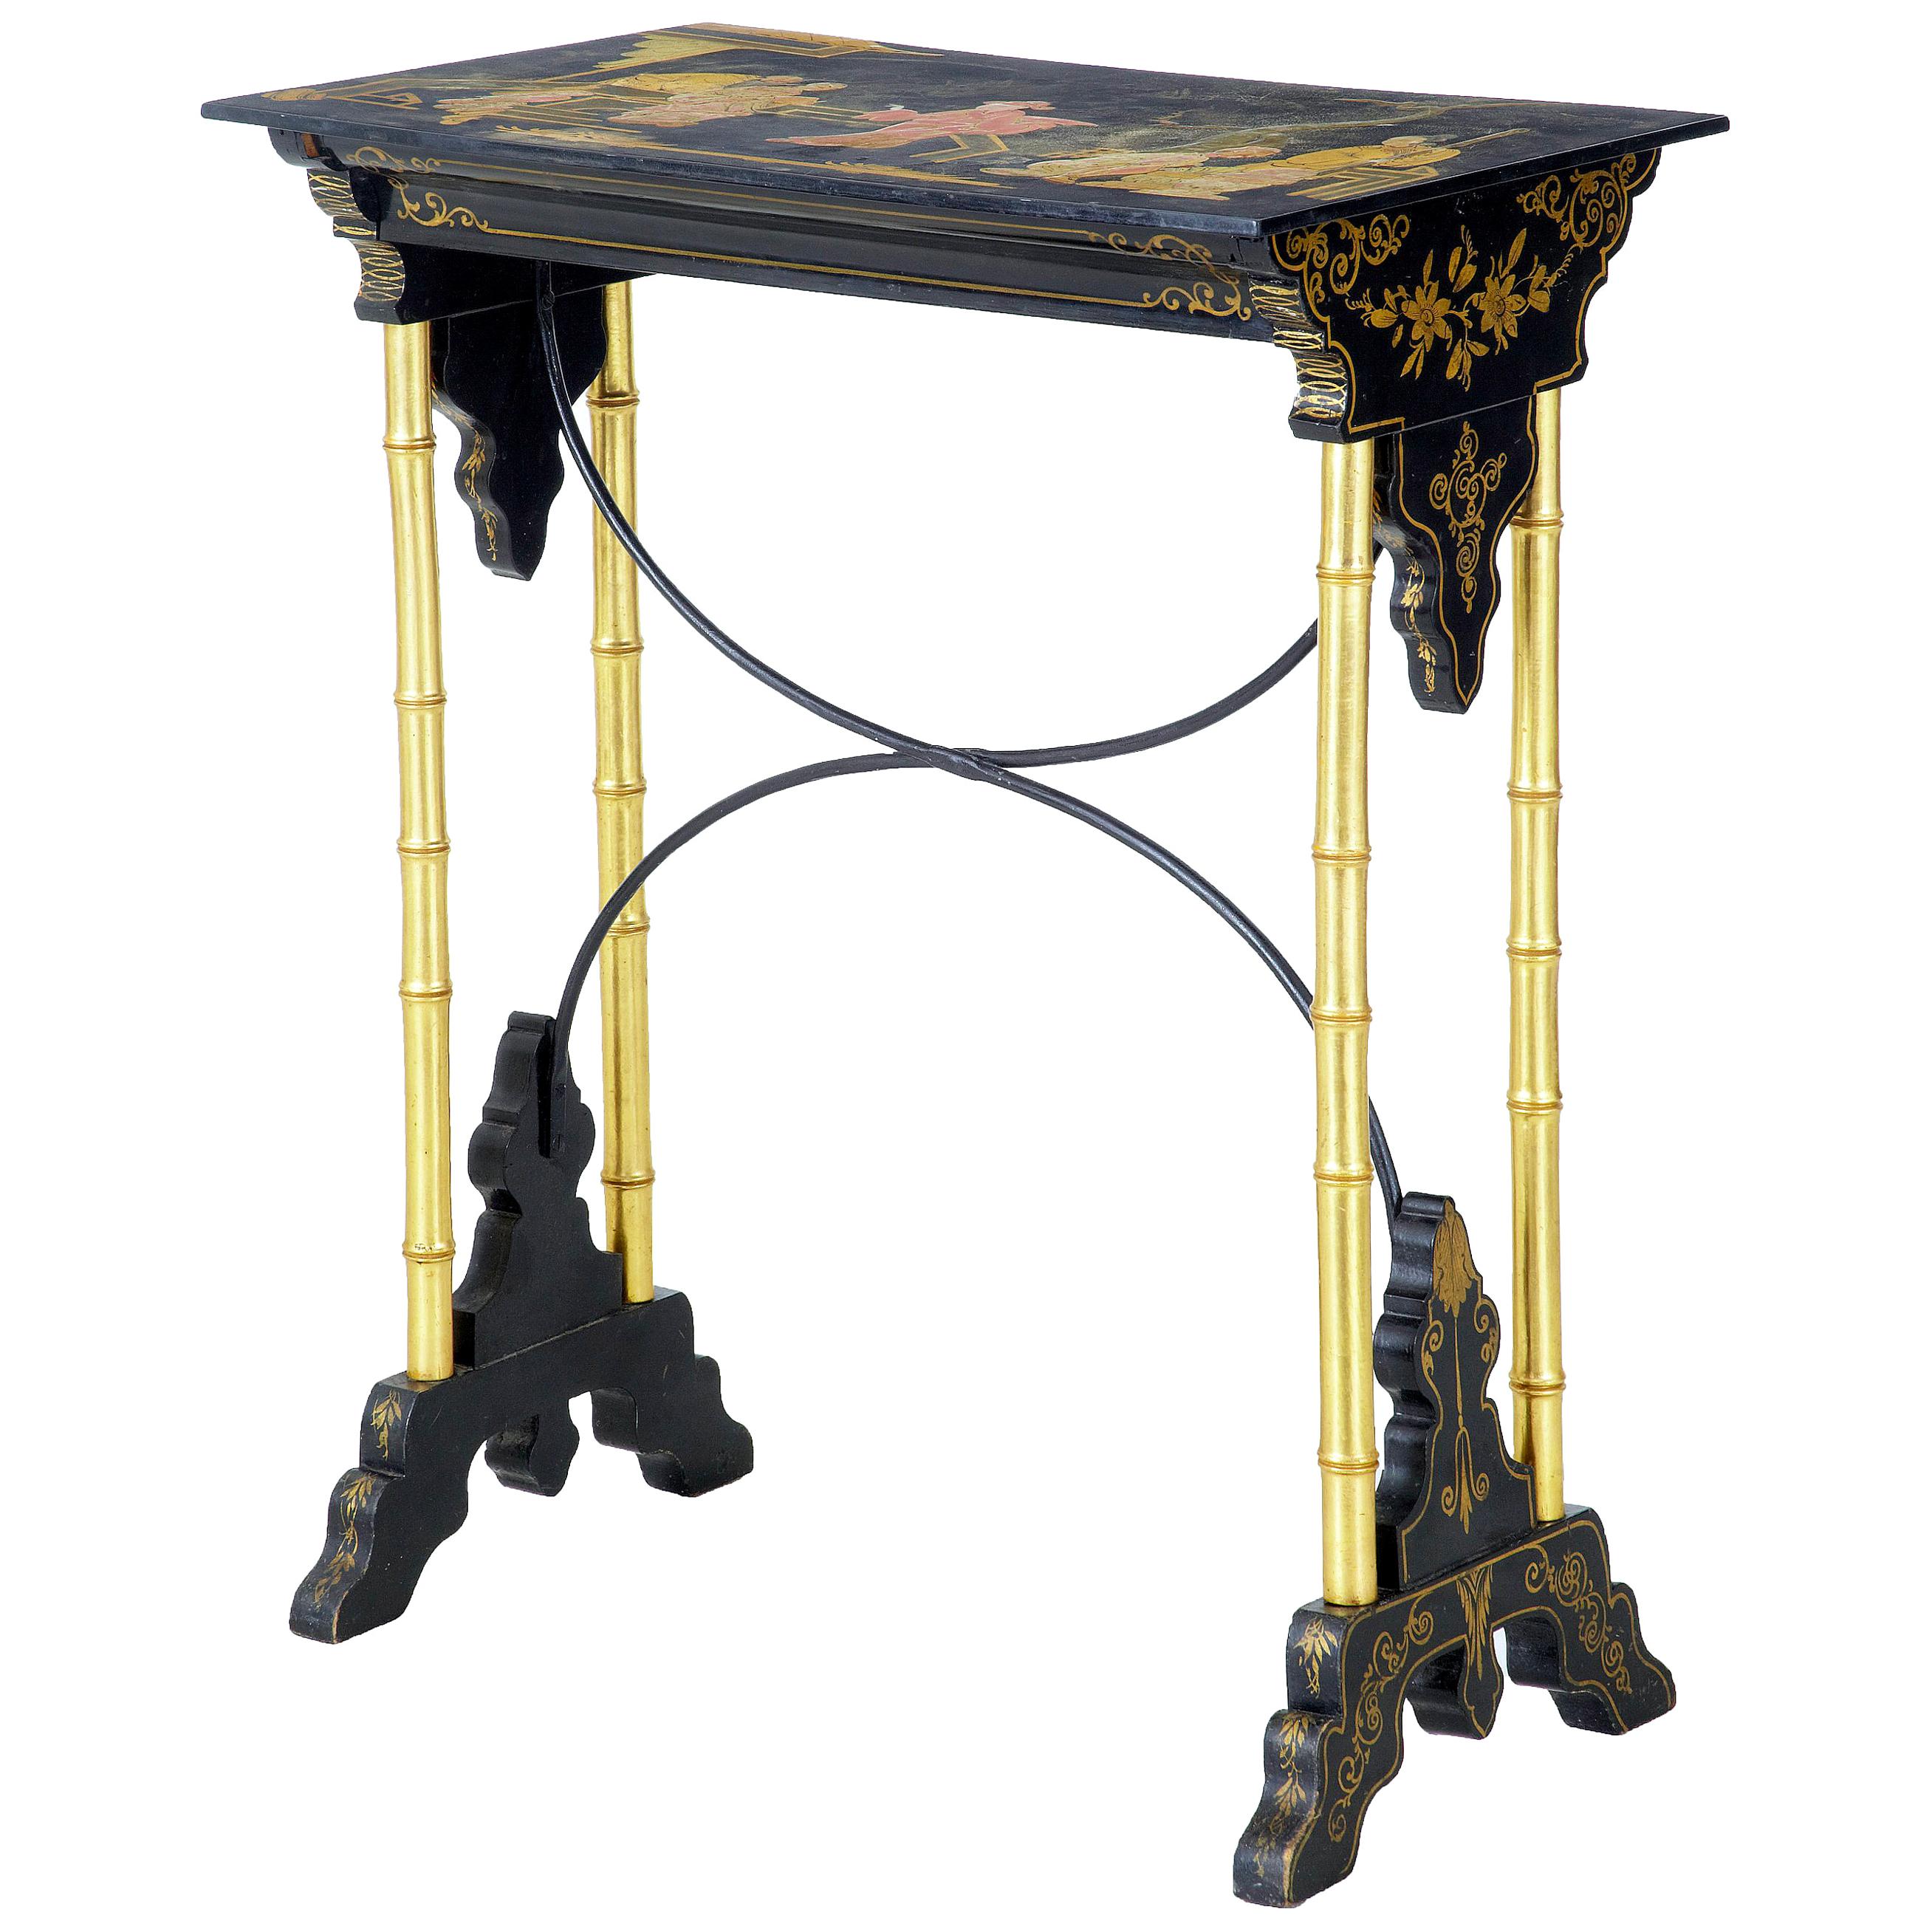 Late 19th Century Japanese Black Lacquer and Gilt Occasional Table